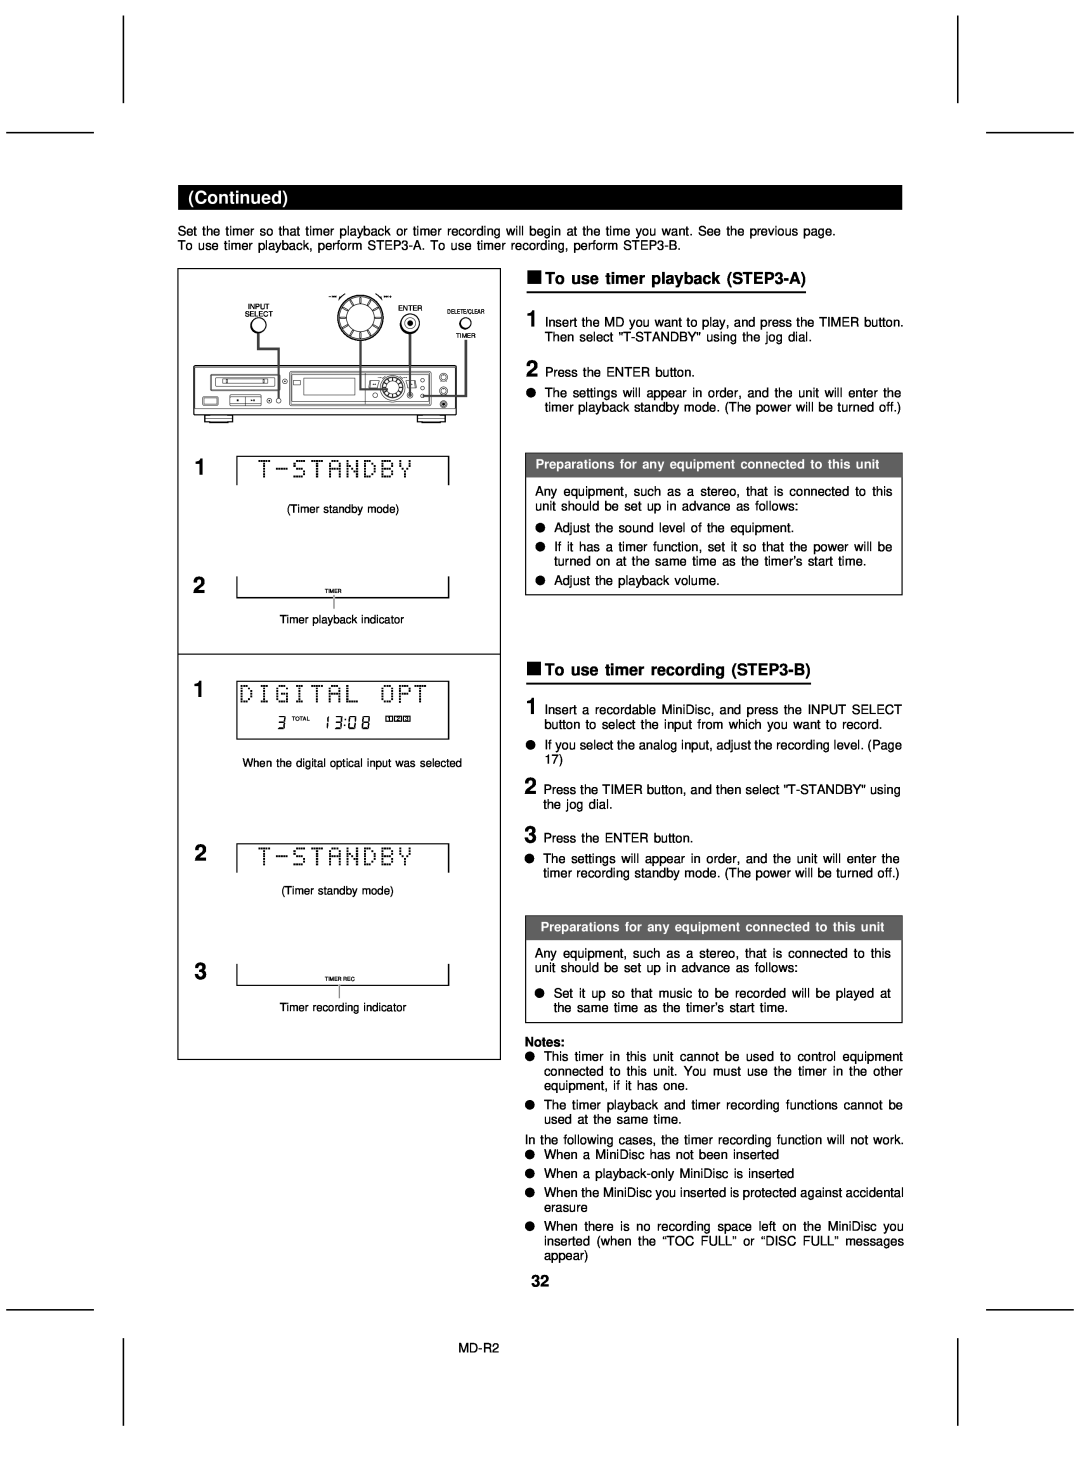 Kenwood MD-R2 operation manual To use timer playback -A, To use timer recording -B, Continued 